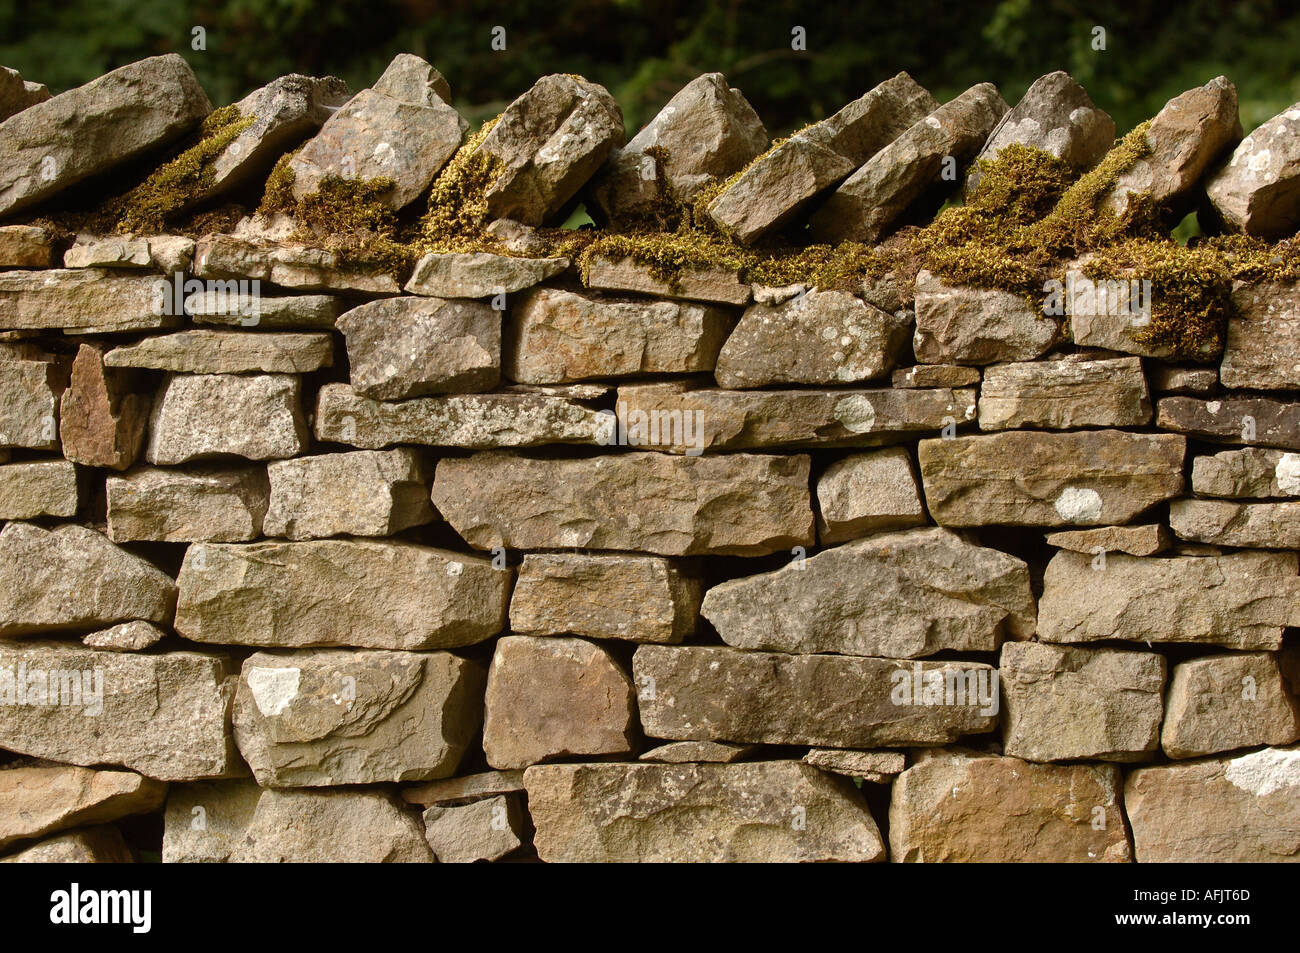 Dry stone wall in the Yorkshire dales Stock Photo